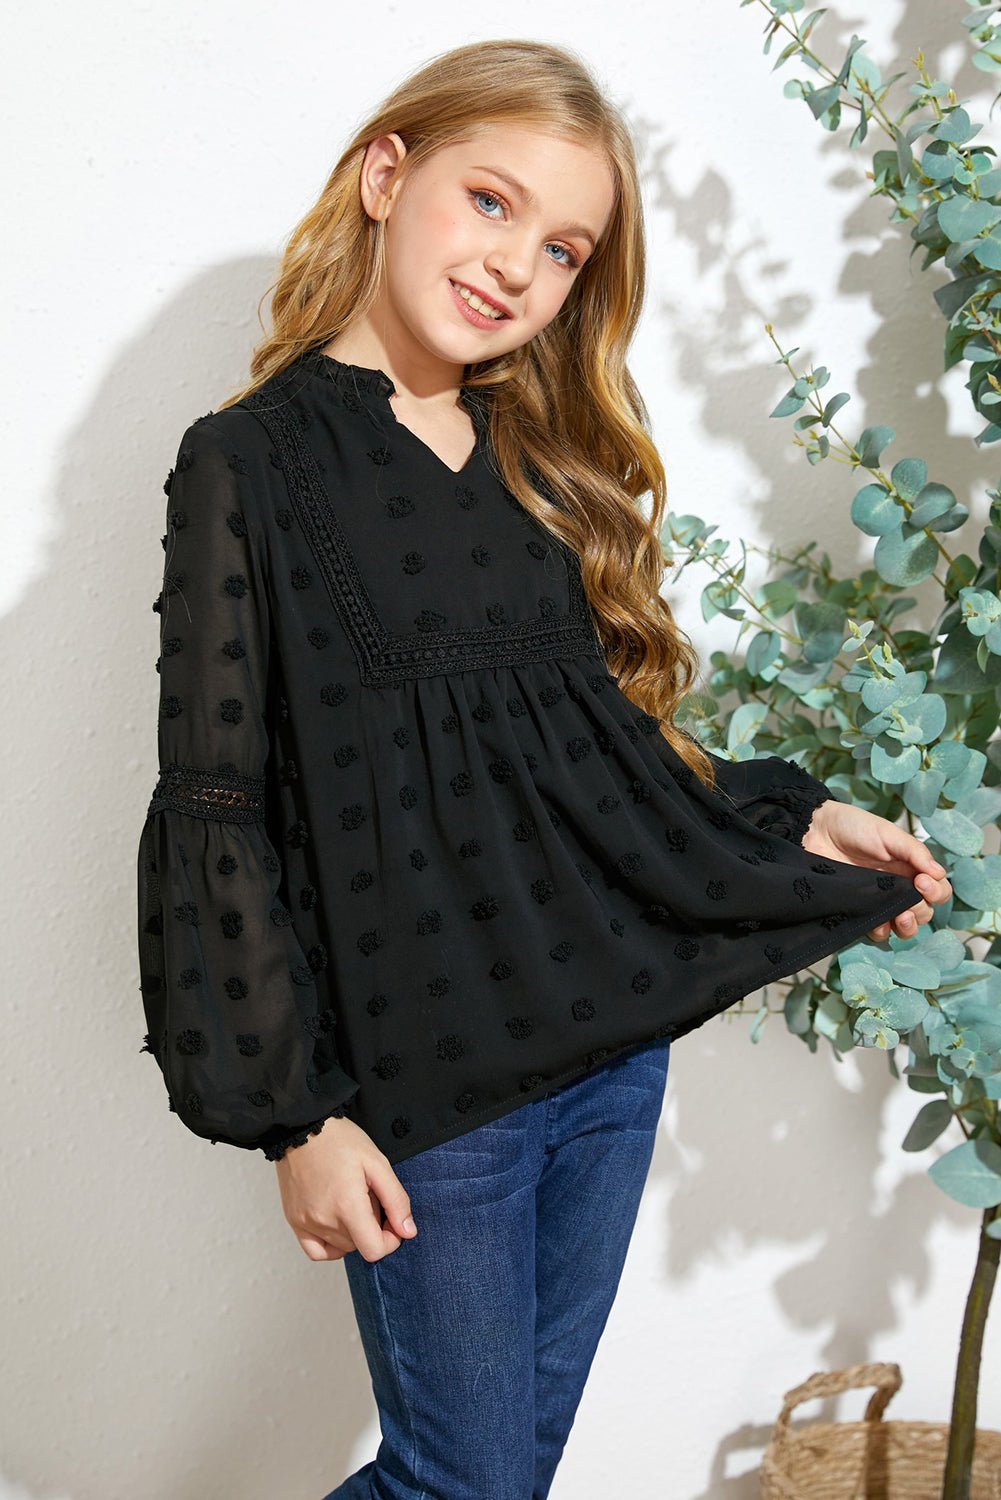 Girls Swiss Dot Spliced Lace Notched Blouse - Fashion Girl Online Store